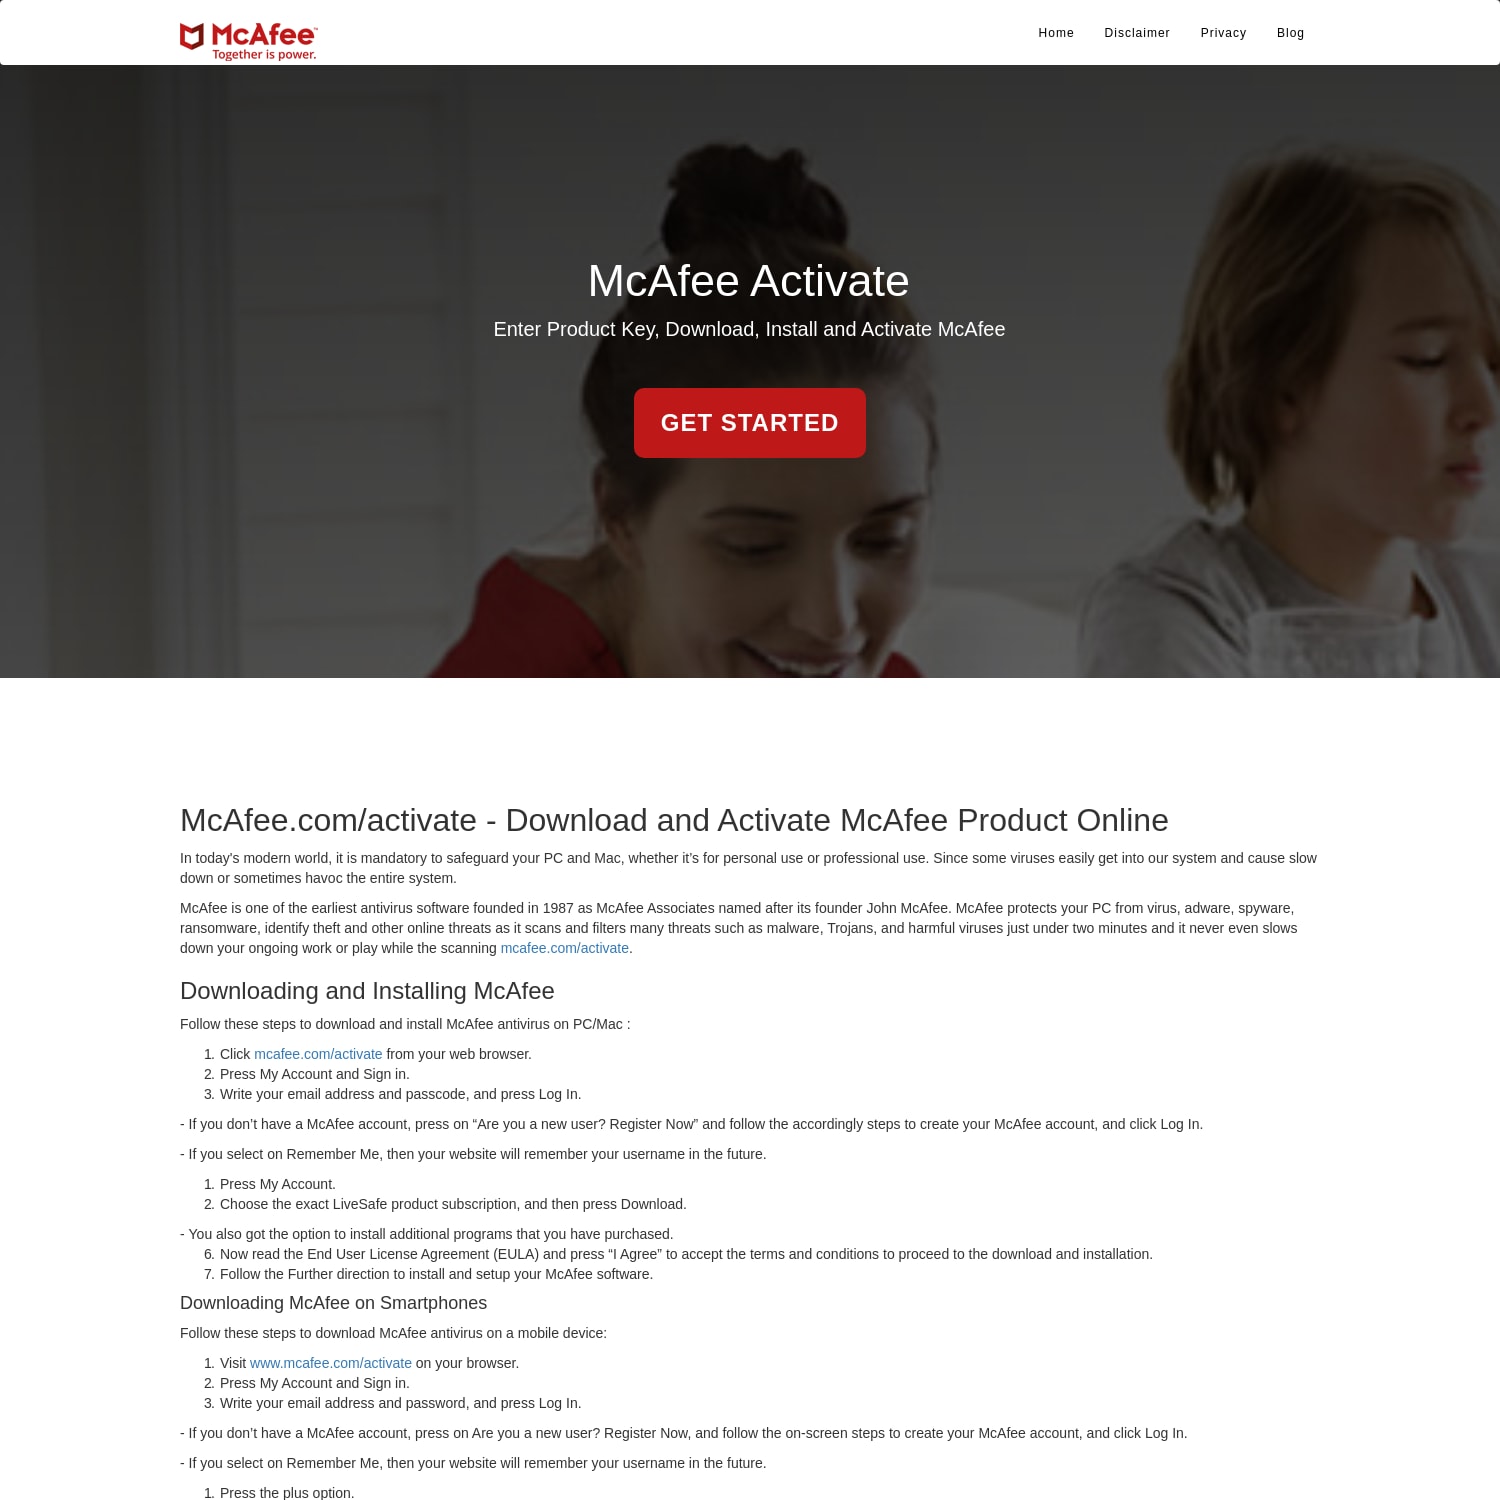 mcafee.com/activate - enter your product key - www.mcafee.com/activate